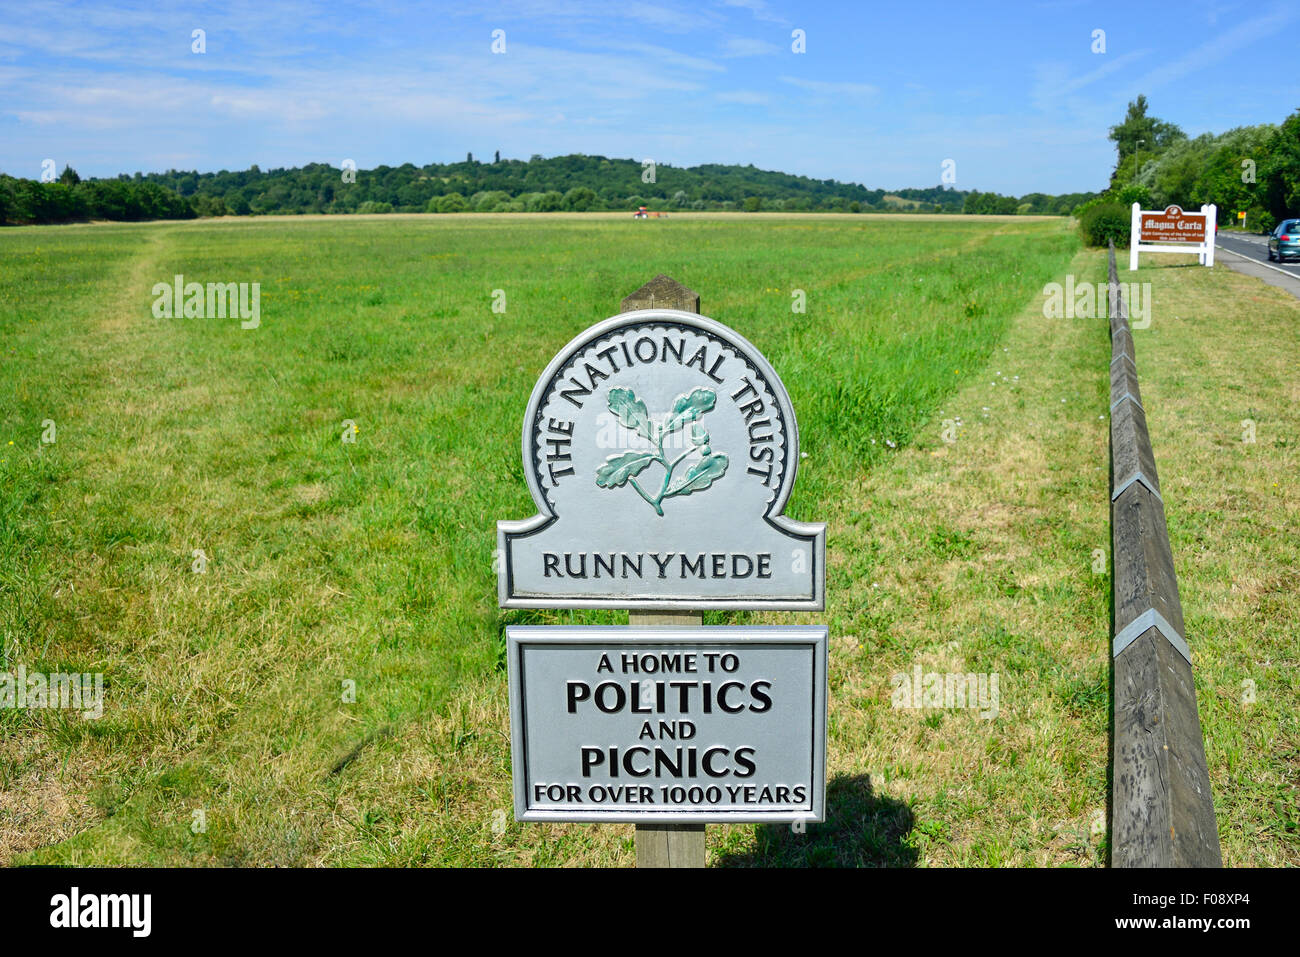 Sign at entrance to Runnymede Meadows, Runnymede, Surrey, England, United Kingdom Stock Photo